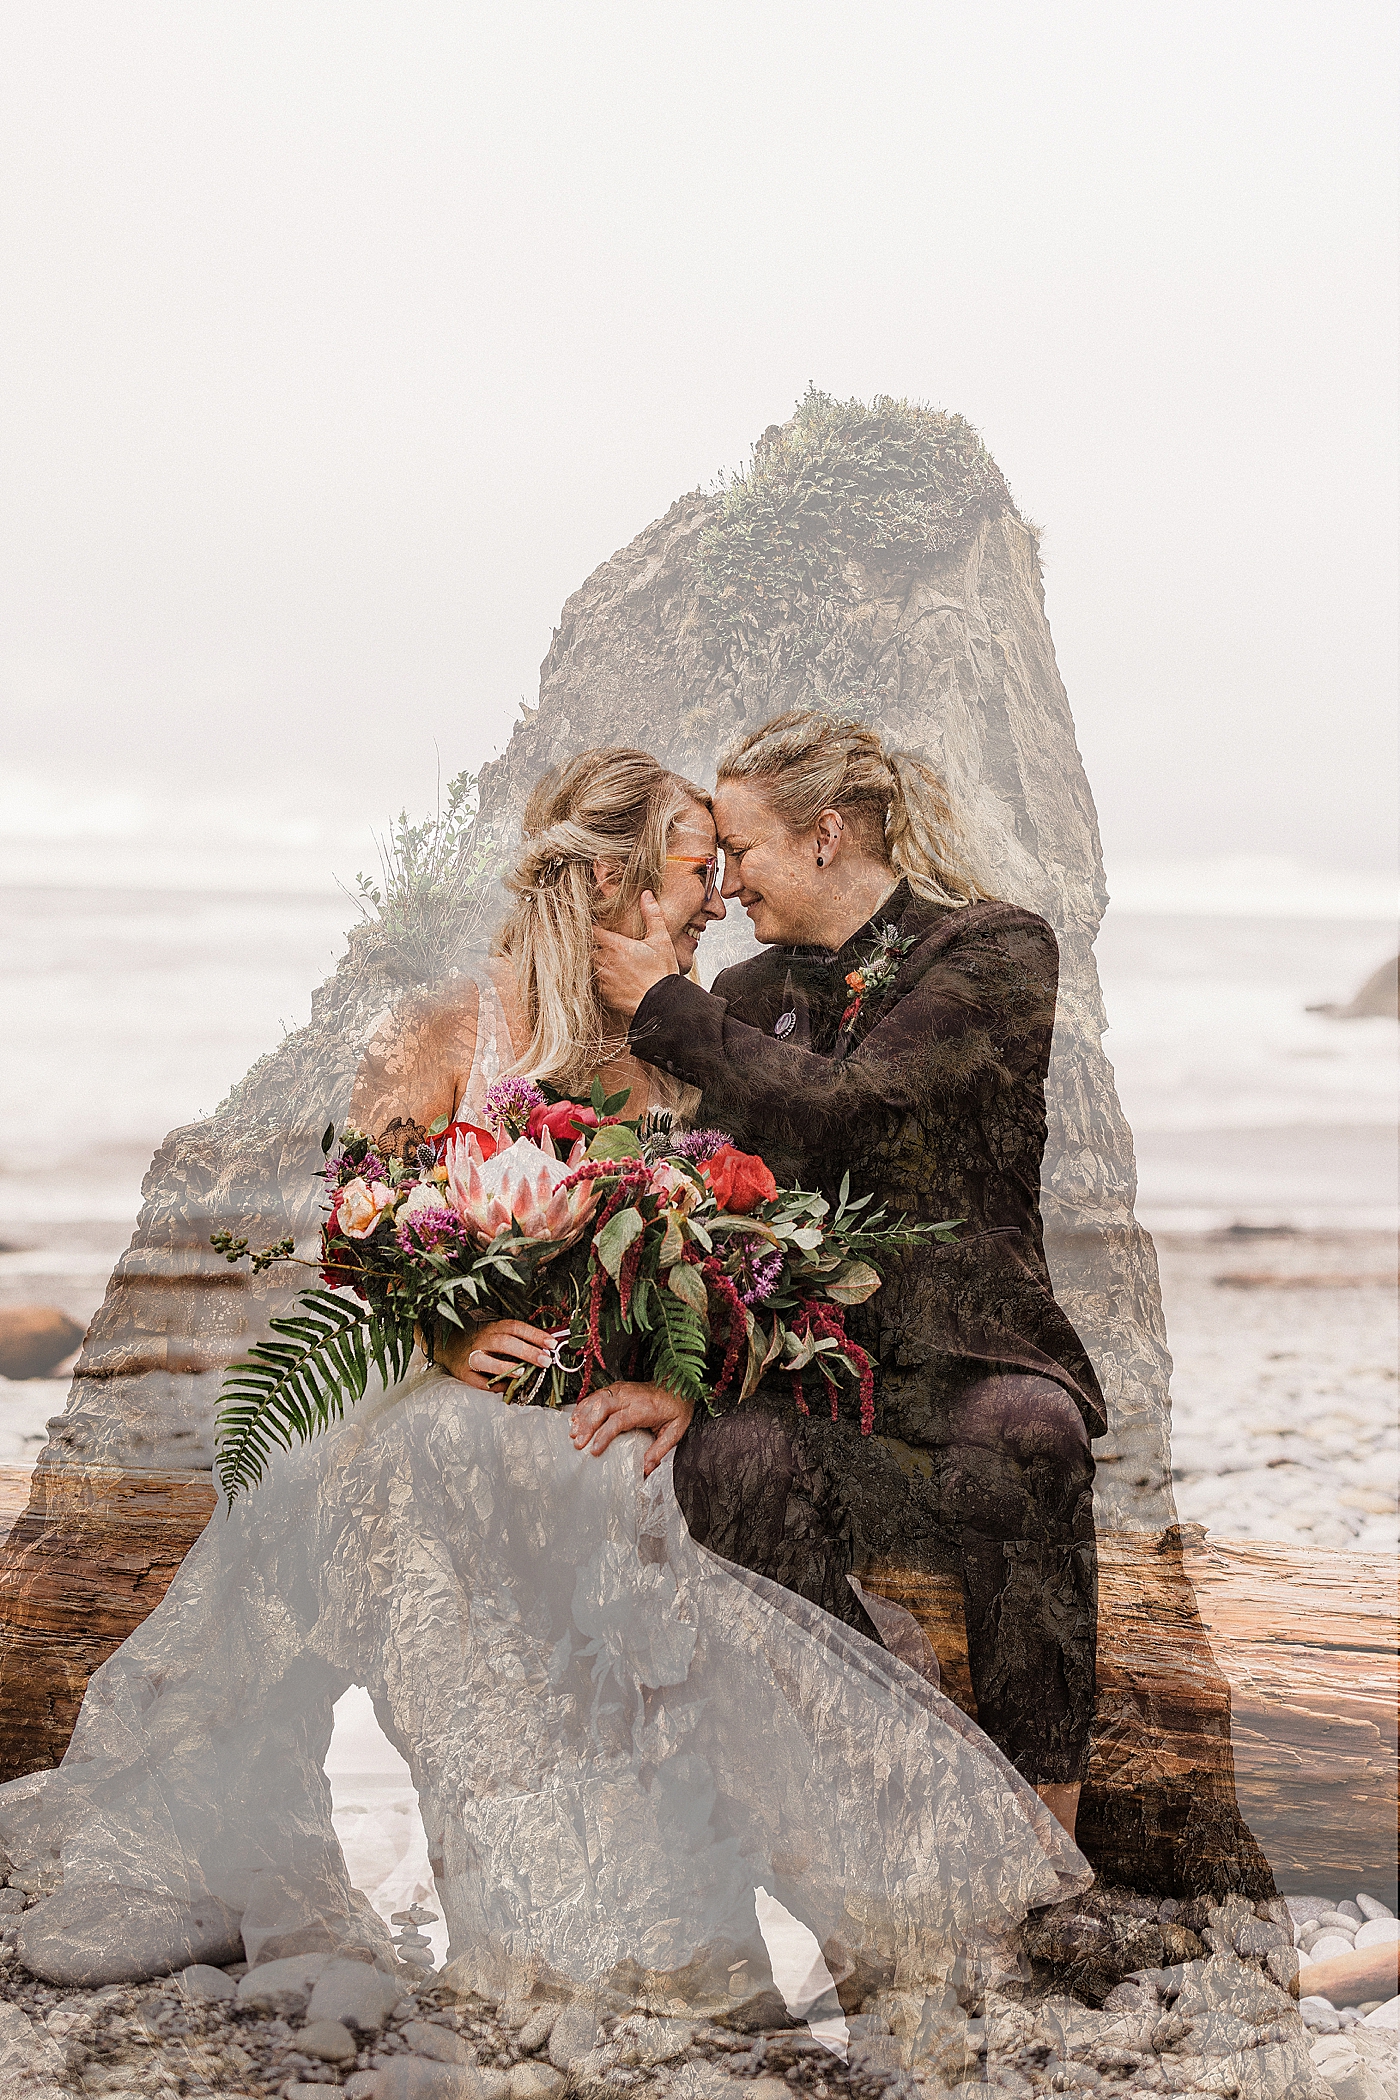 Double exposure of brides during PNW Elopement. Photo by Megan Montalvo Photography.